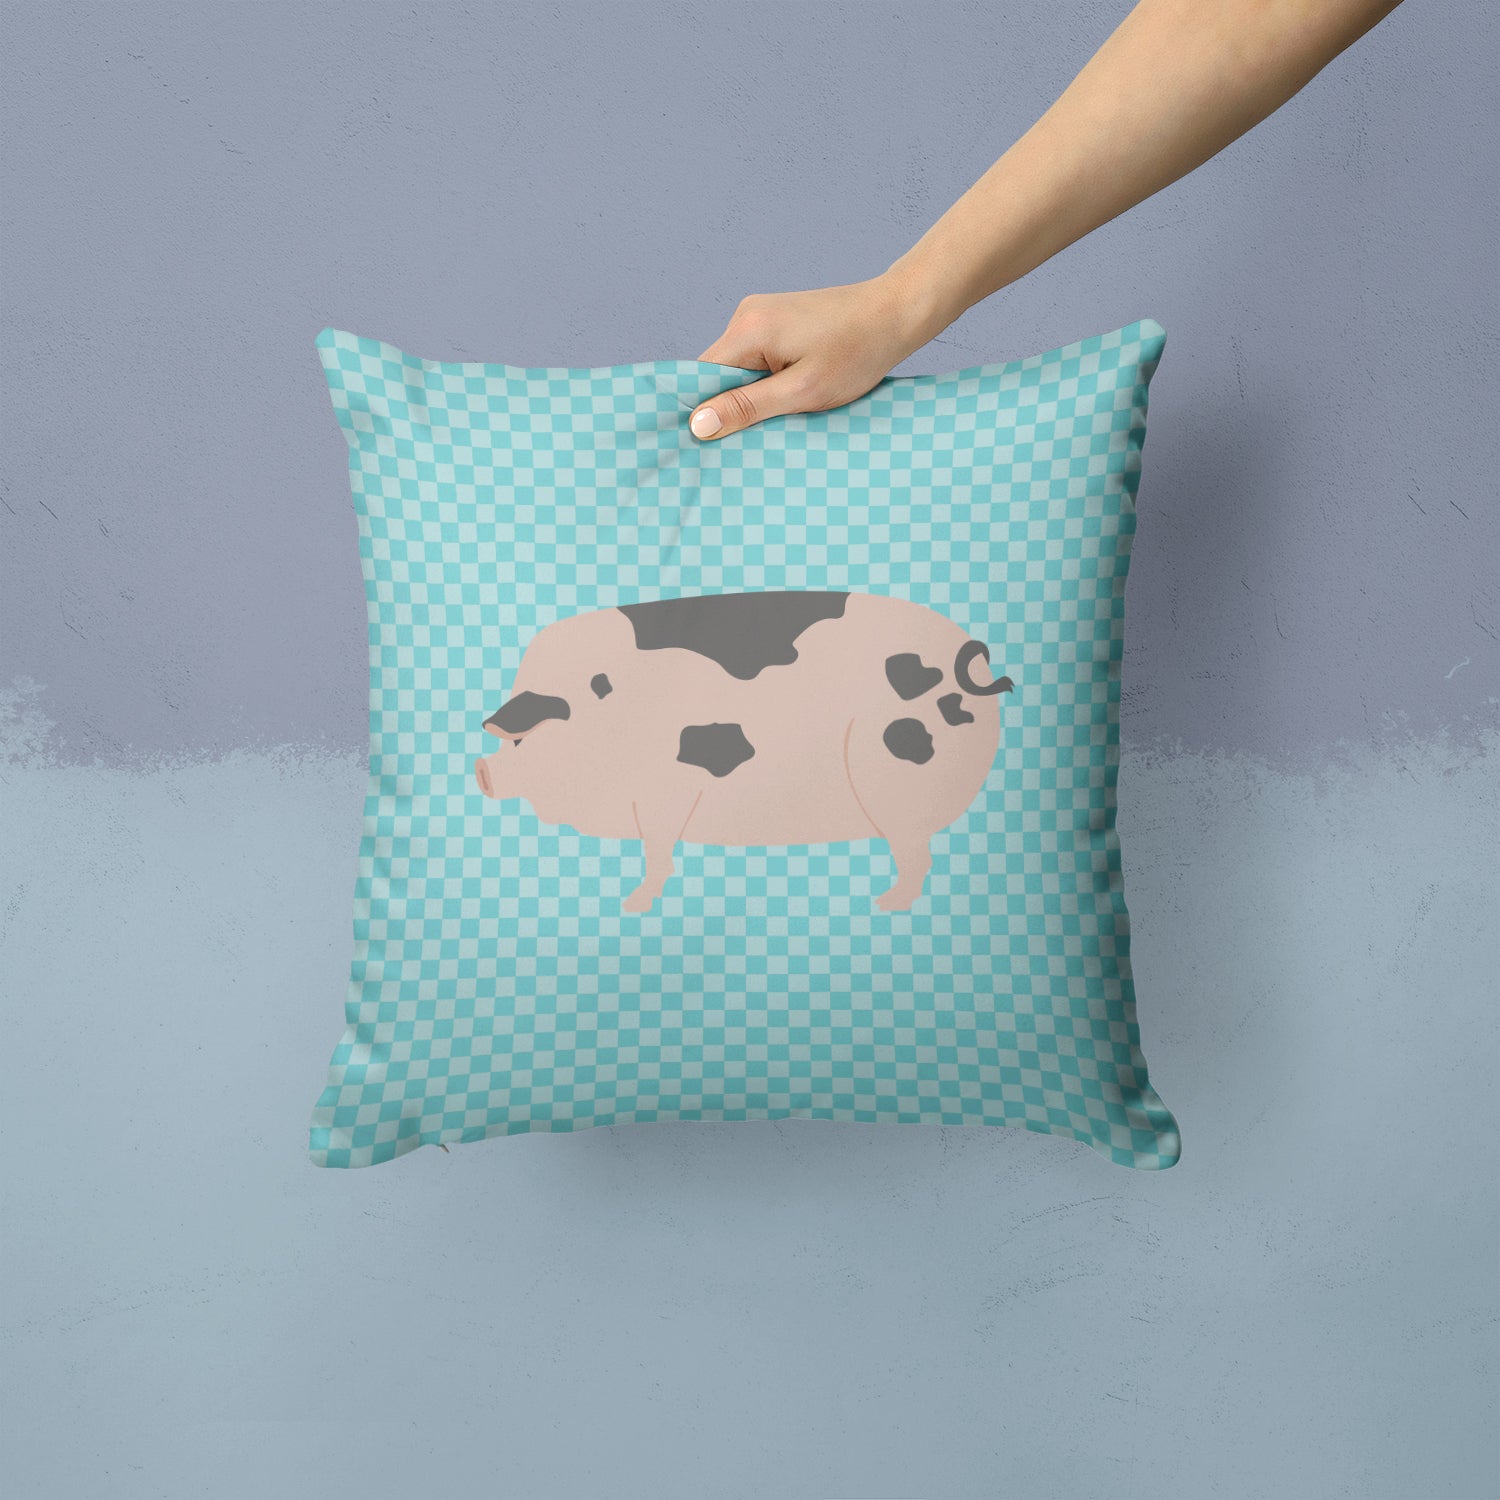 Gloucester Old Spot Pig Blue Check Fabric Decorative Pillow BB8114PW1414 - the-store.com